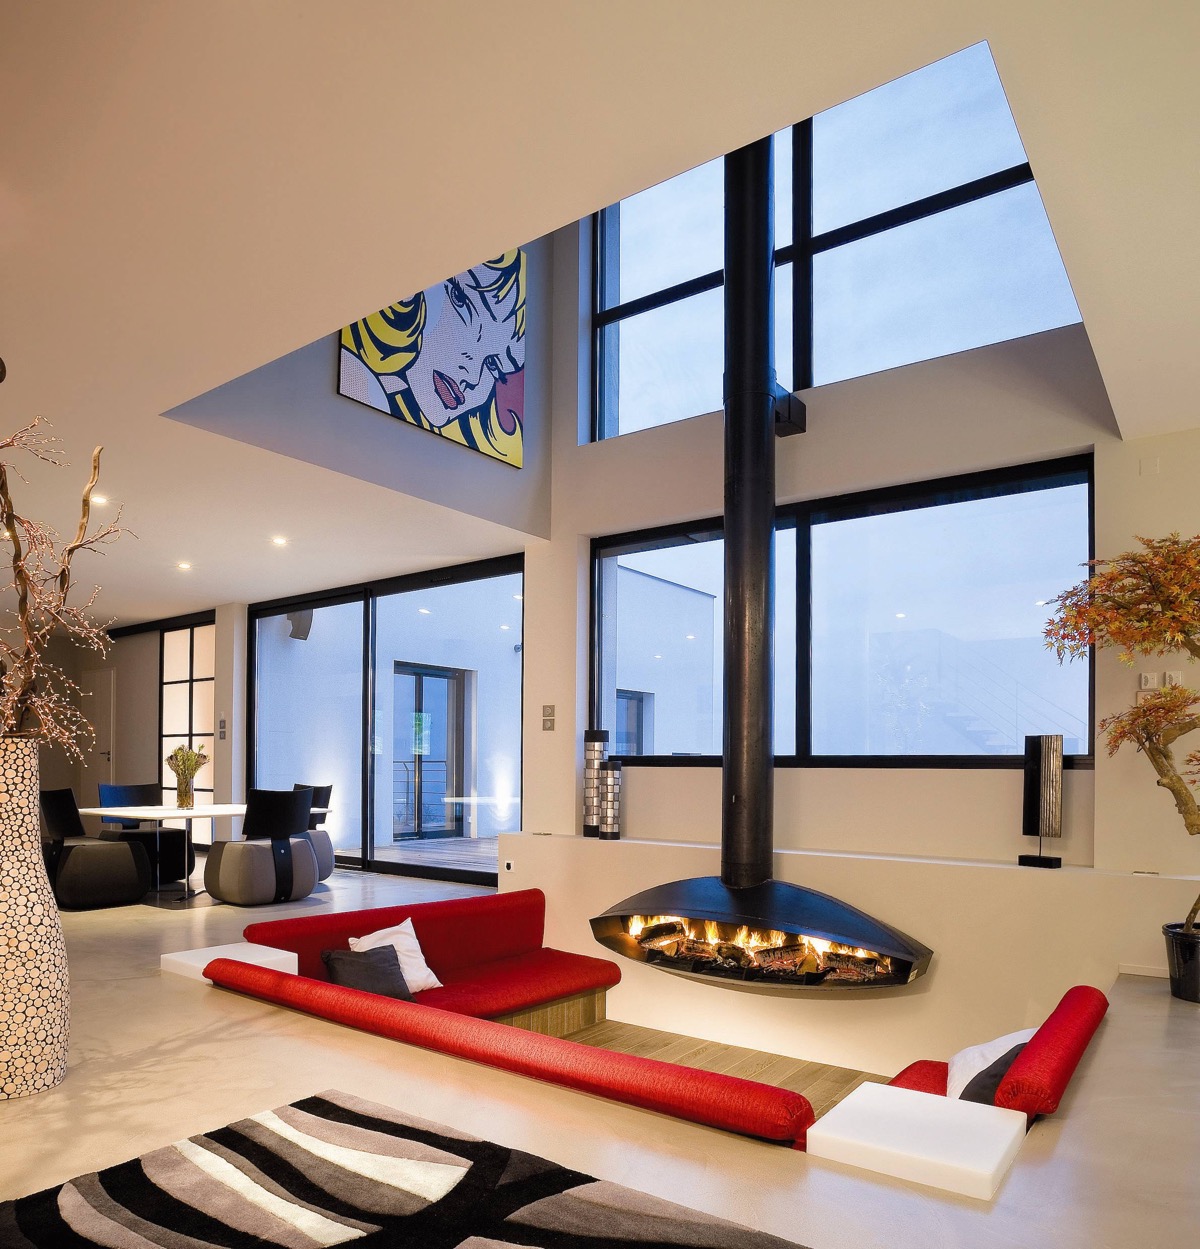 red-and-black-living-room-decorating-ide